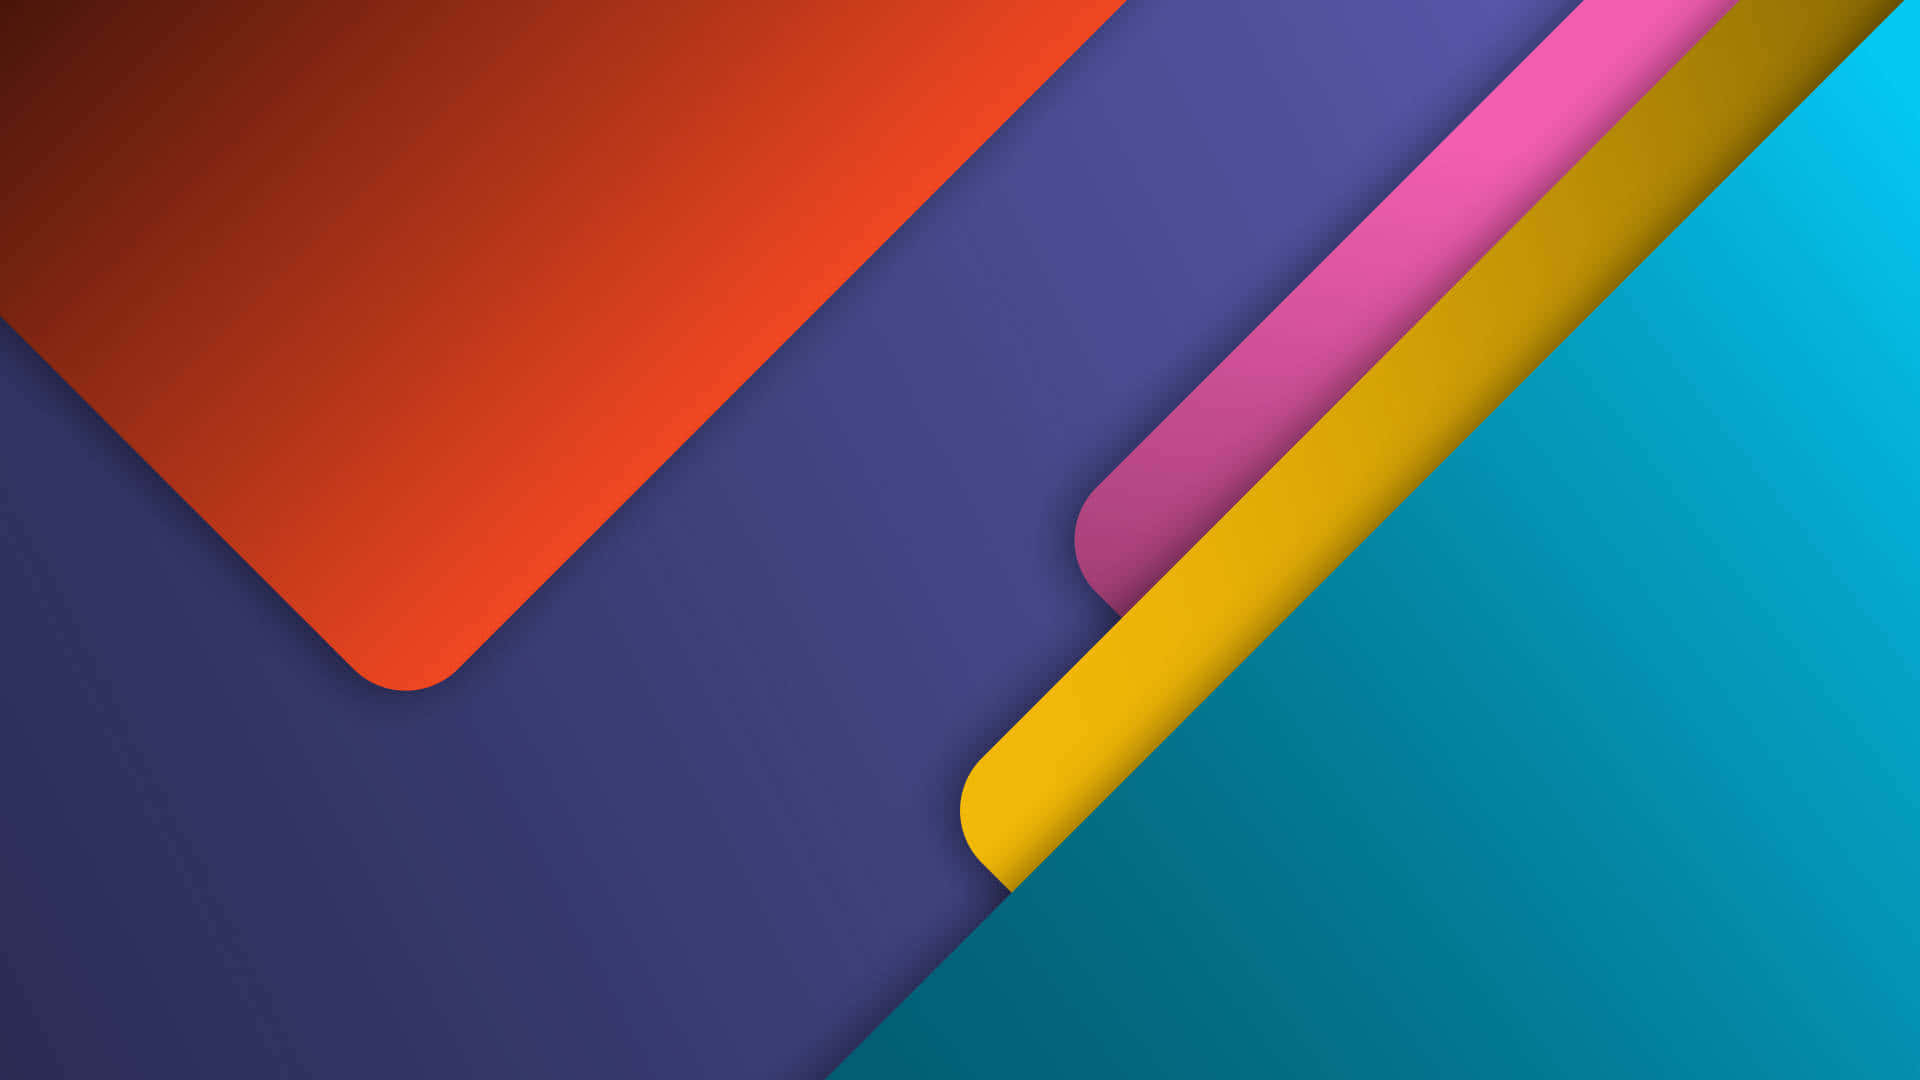 “Beautiful Colored Abstract Material Design Wallpaper.”